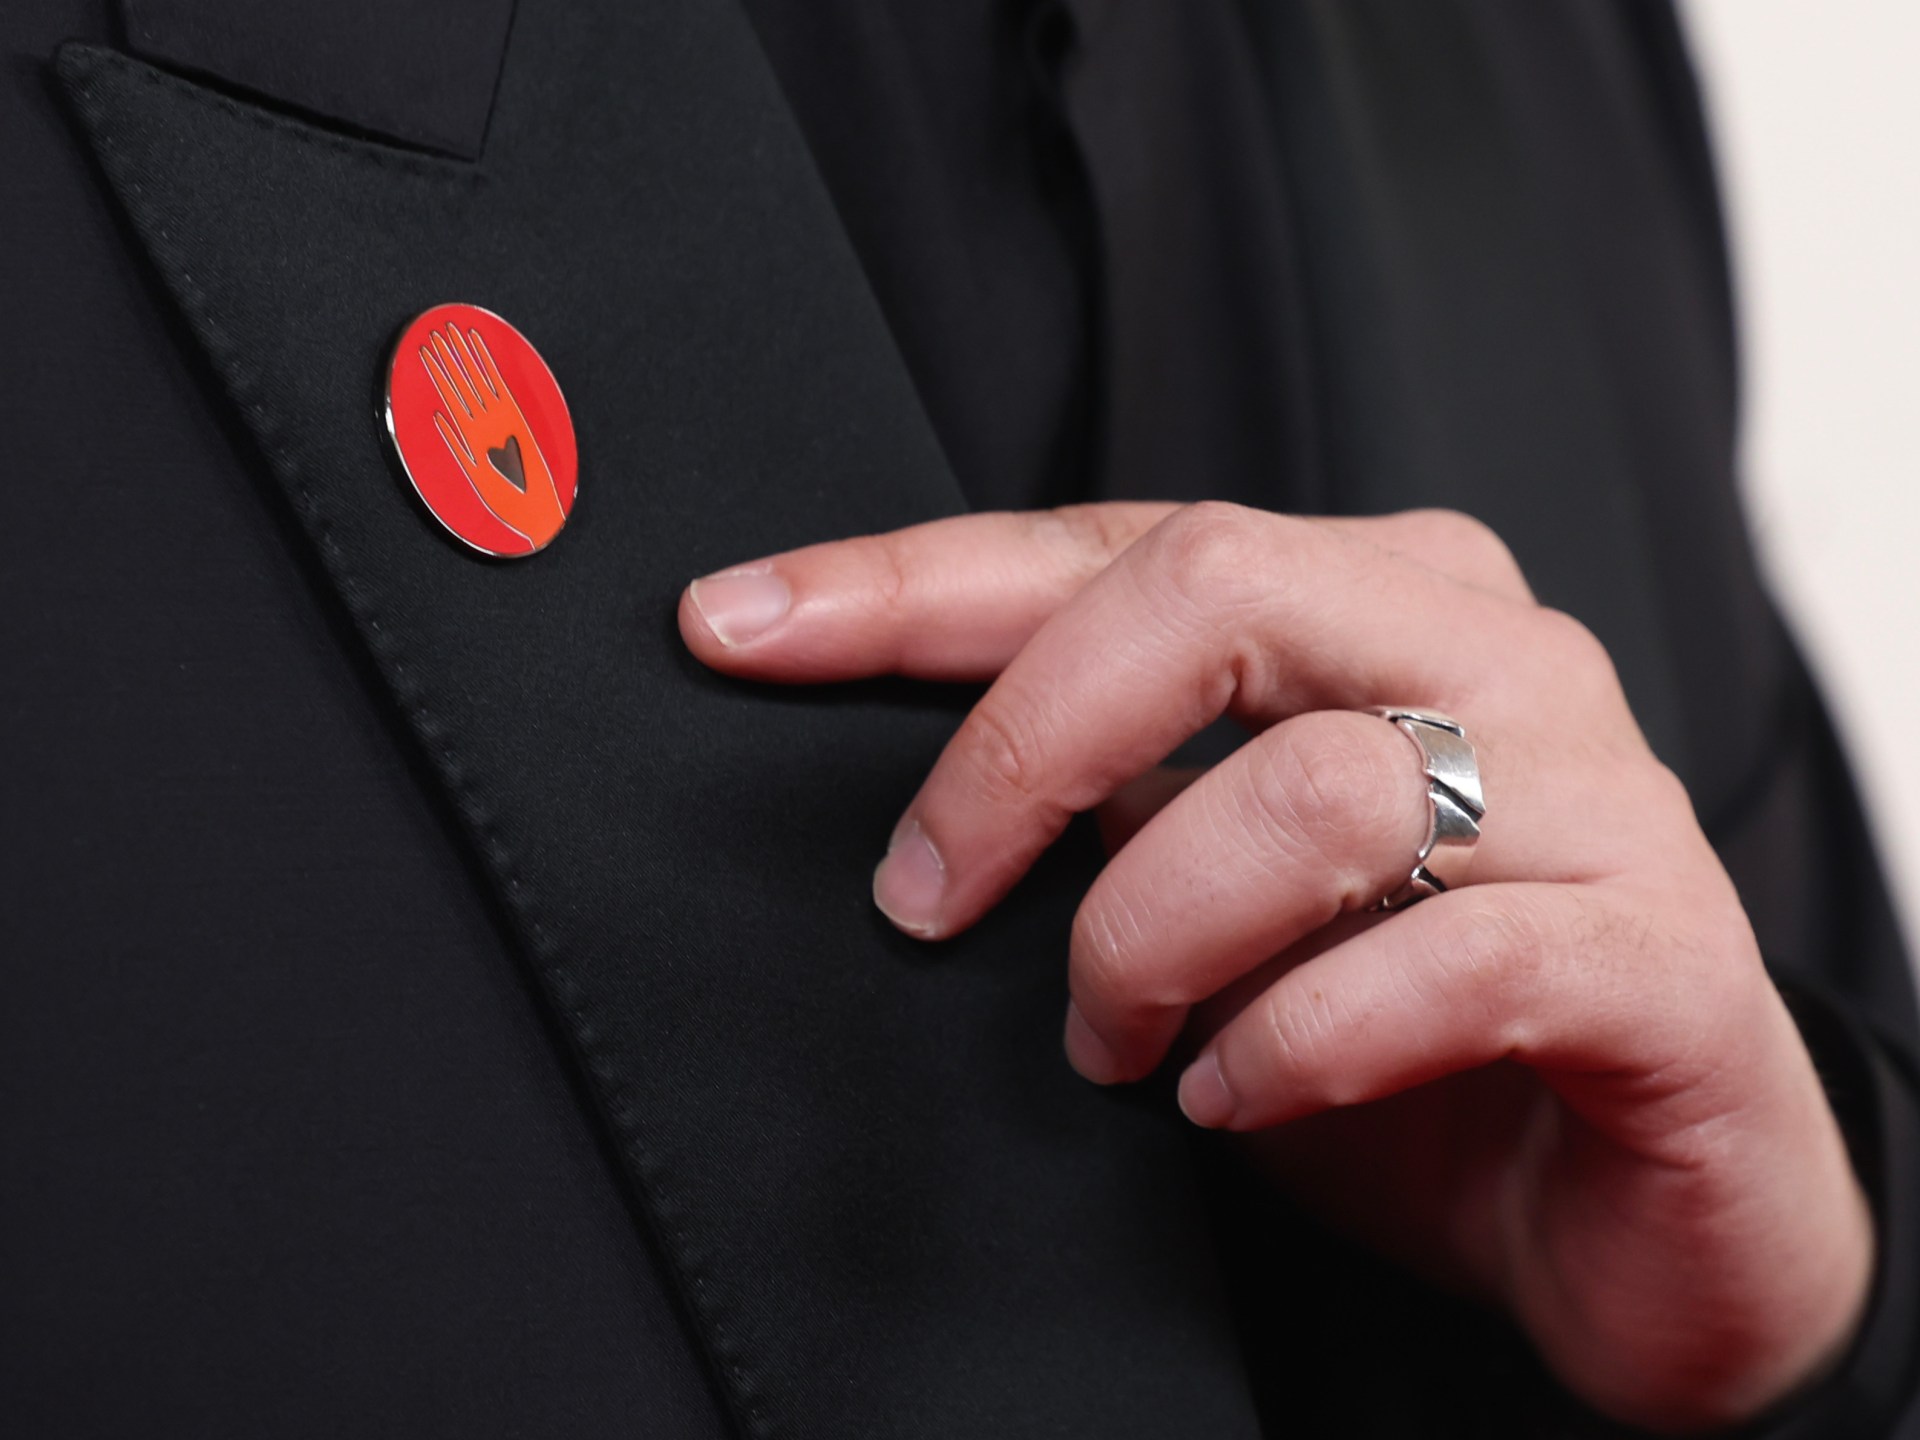 Celebrities at Oscars wear red pins to support Gaza ceasefire calls